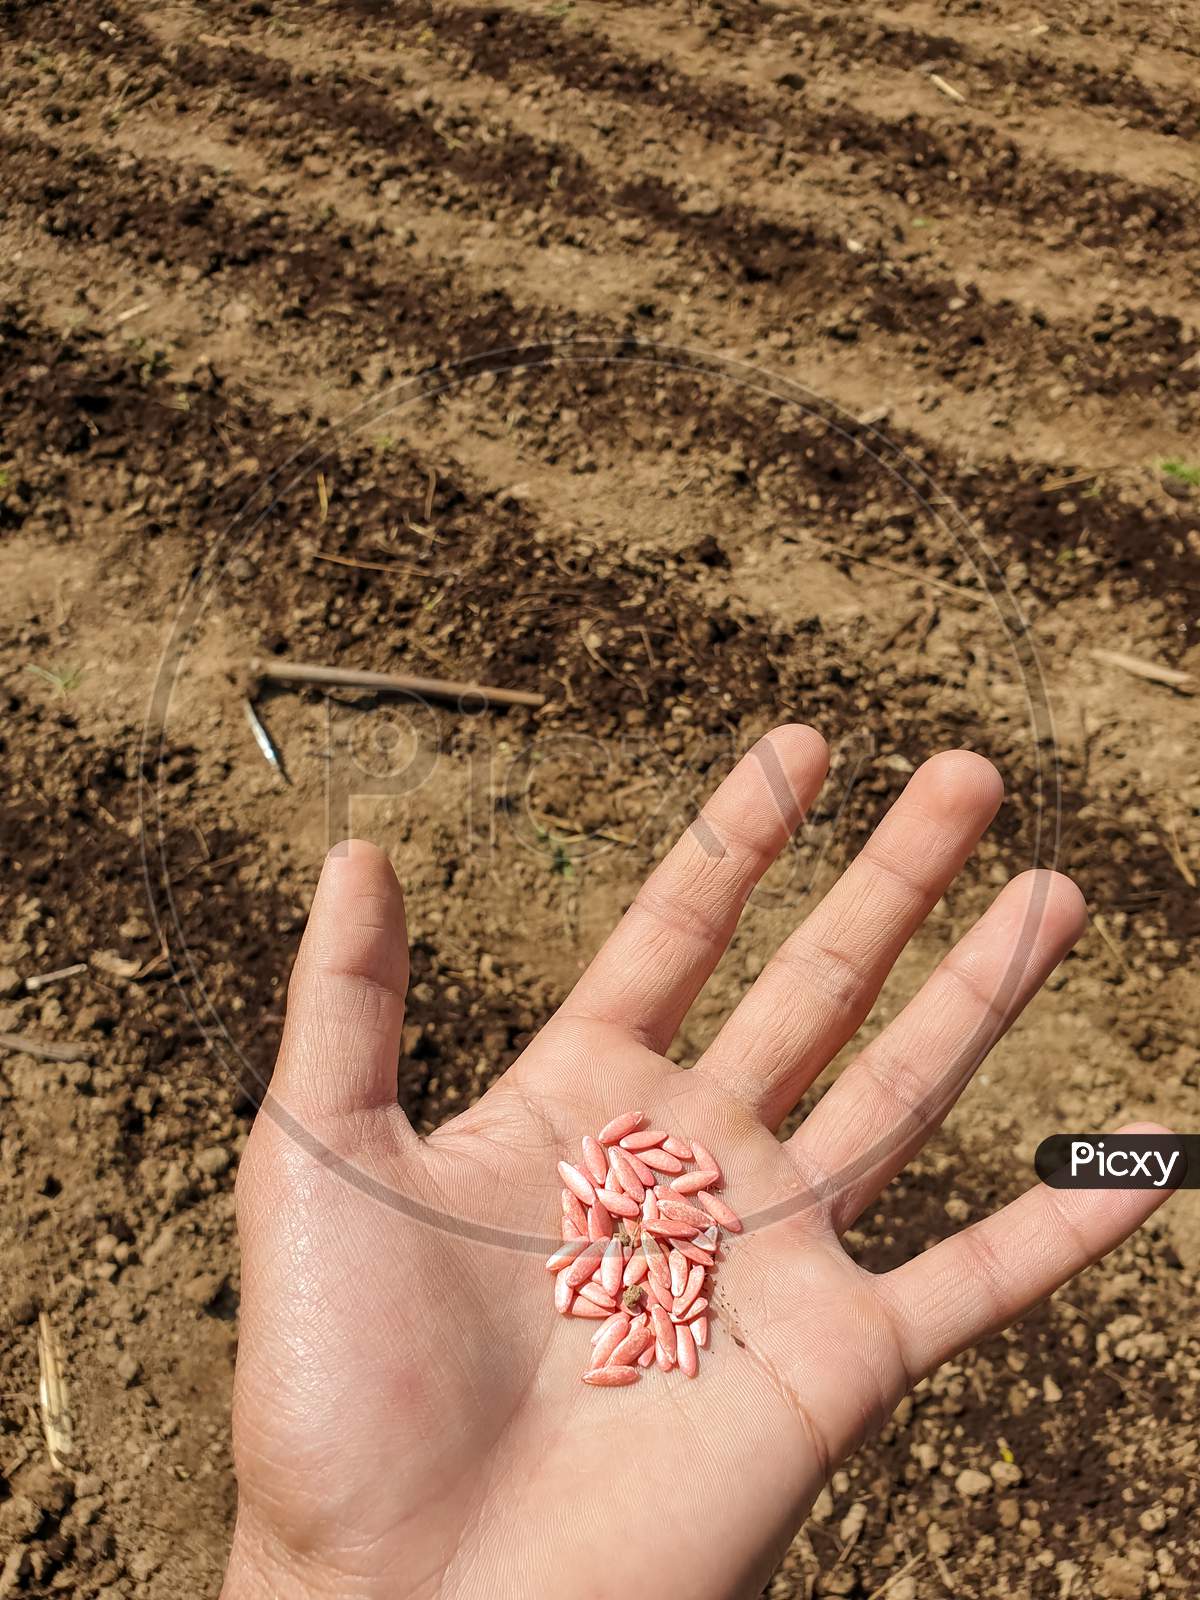 Photo of cucumber seeds in human hand - Sowing cucumber in the farm in hilly area of Himachal Pradesh, India